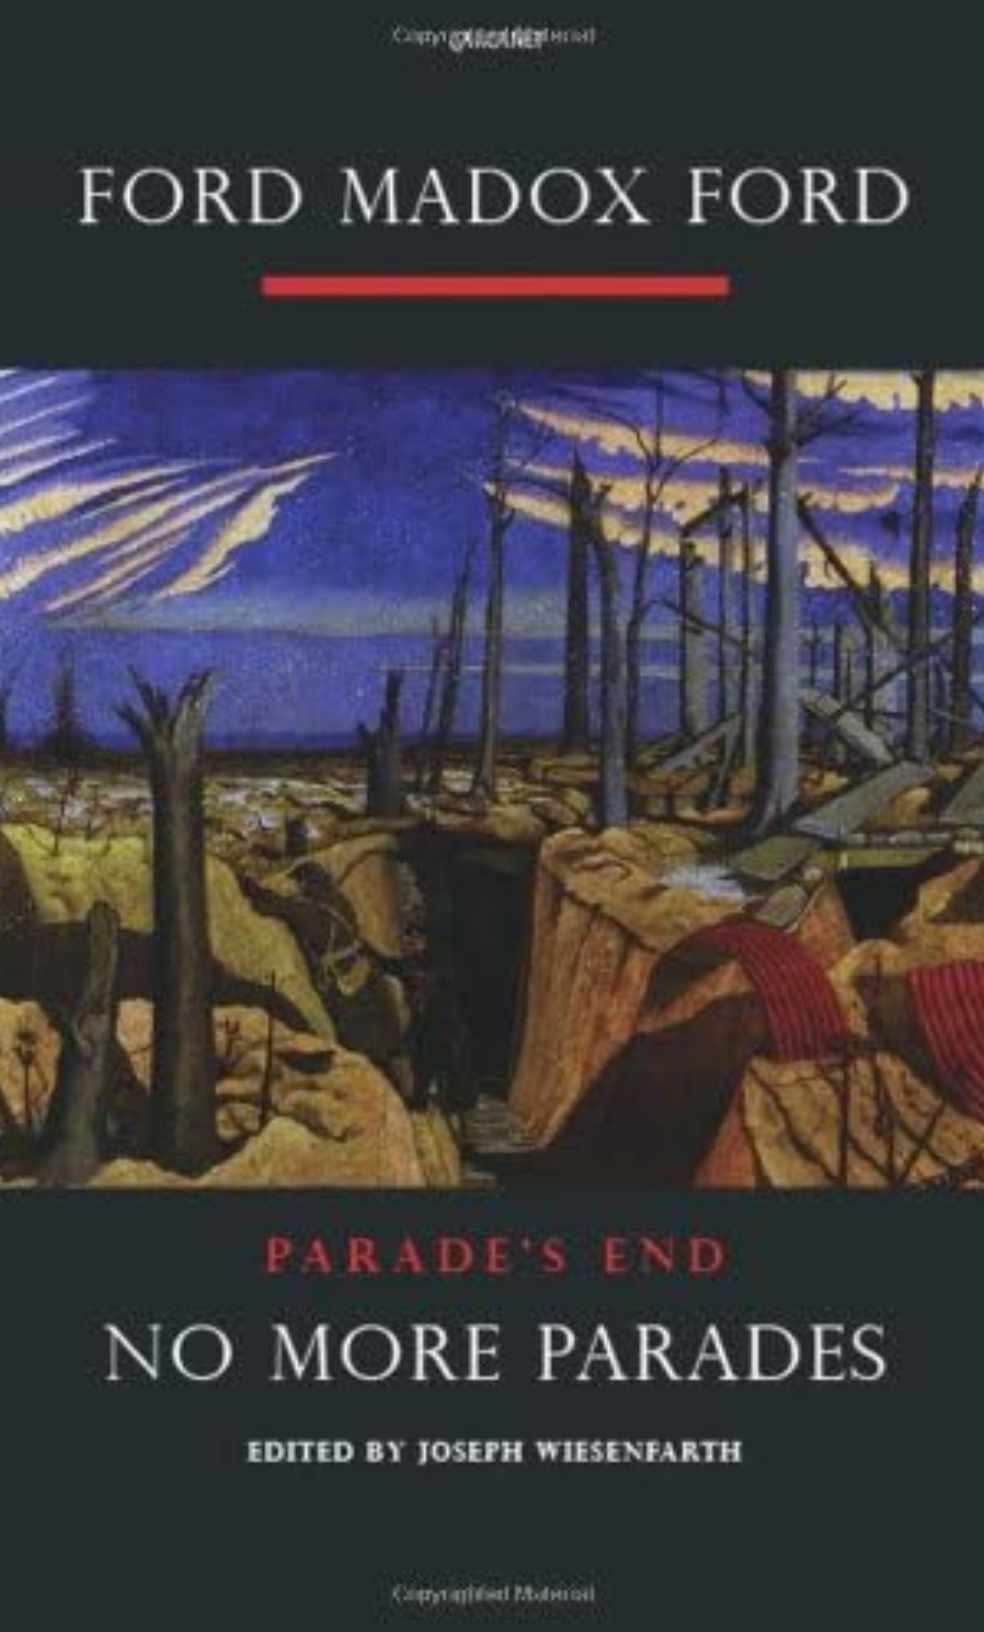 Parade's End: No More Parades by Ford Madox Ford